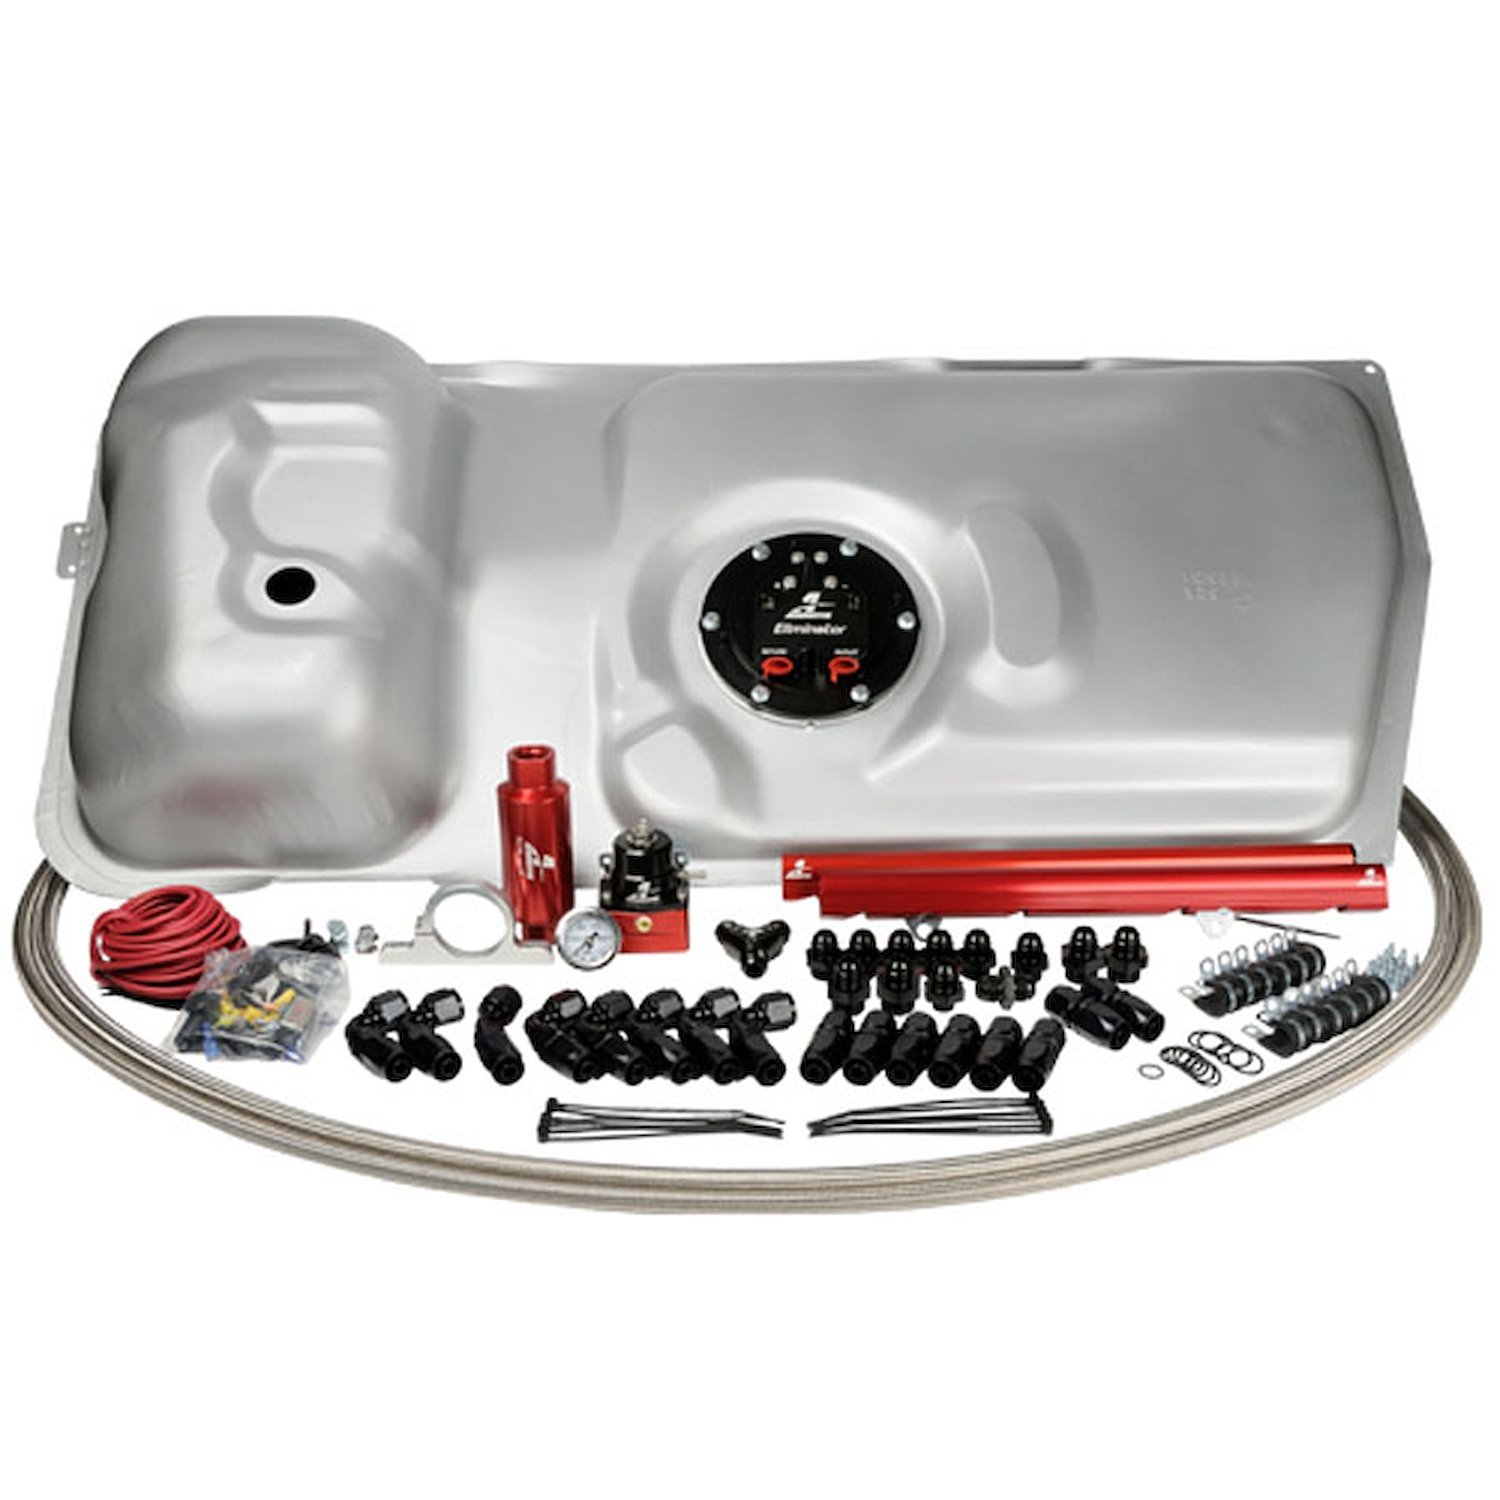 Complete Fuel Tank System with Eliminator Fuel Pump